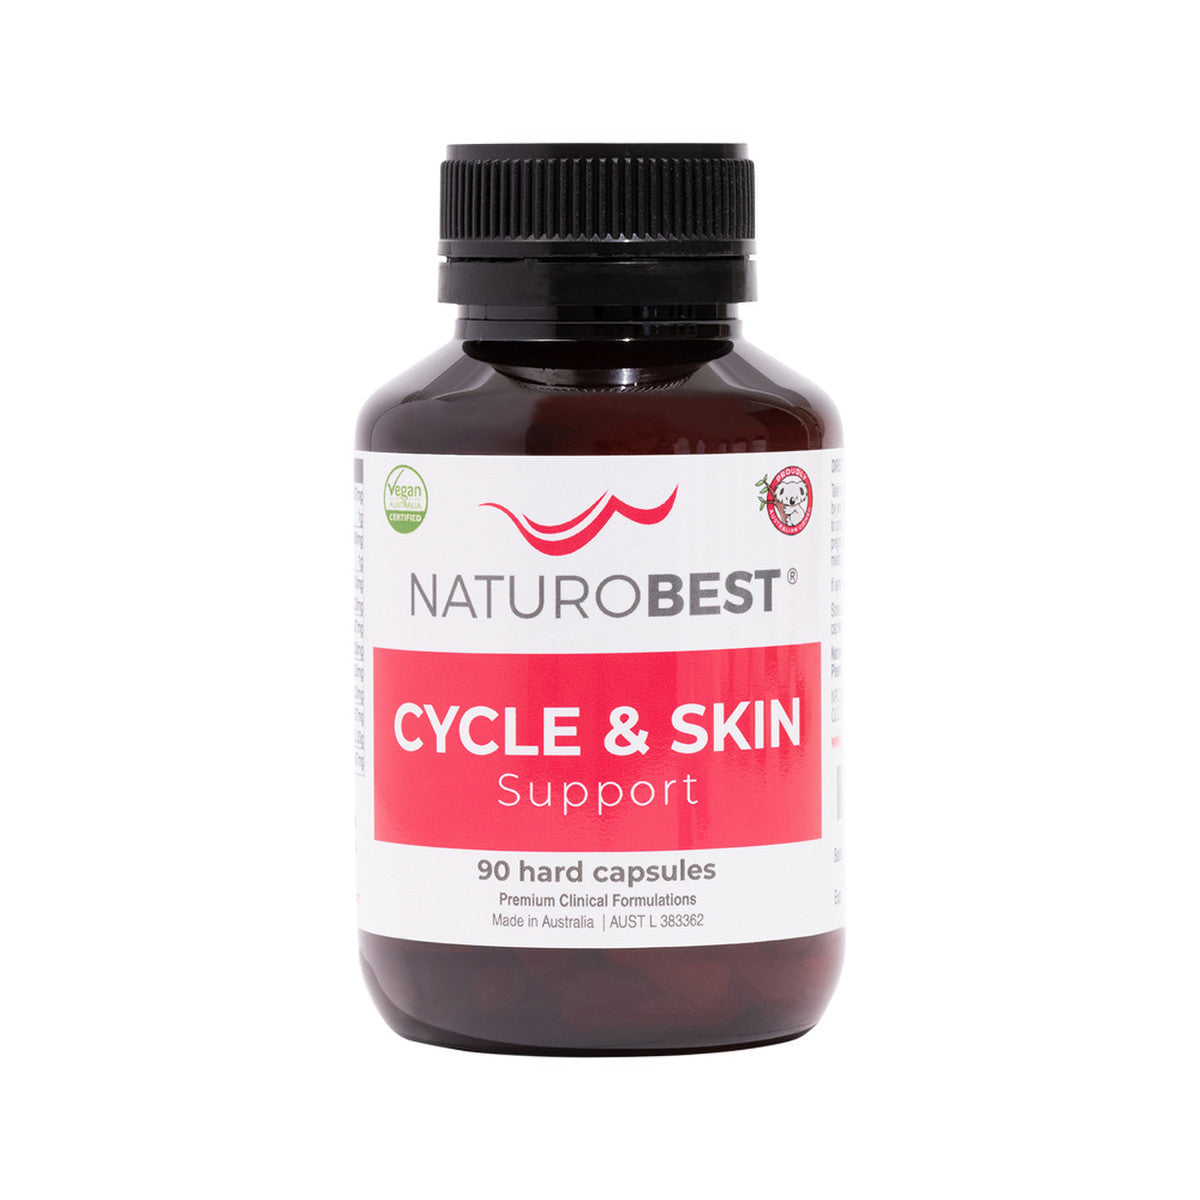 NaturoBest - Cycle & Skin Support